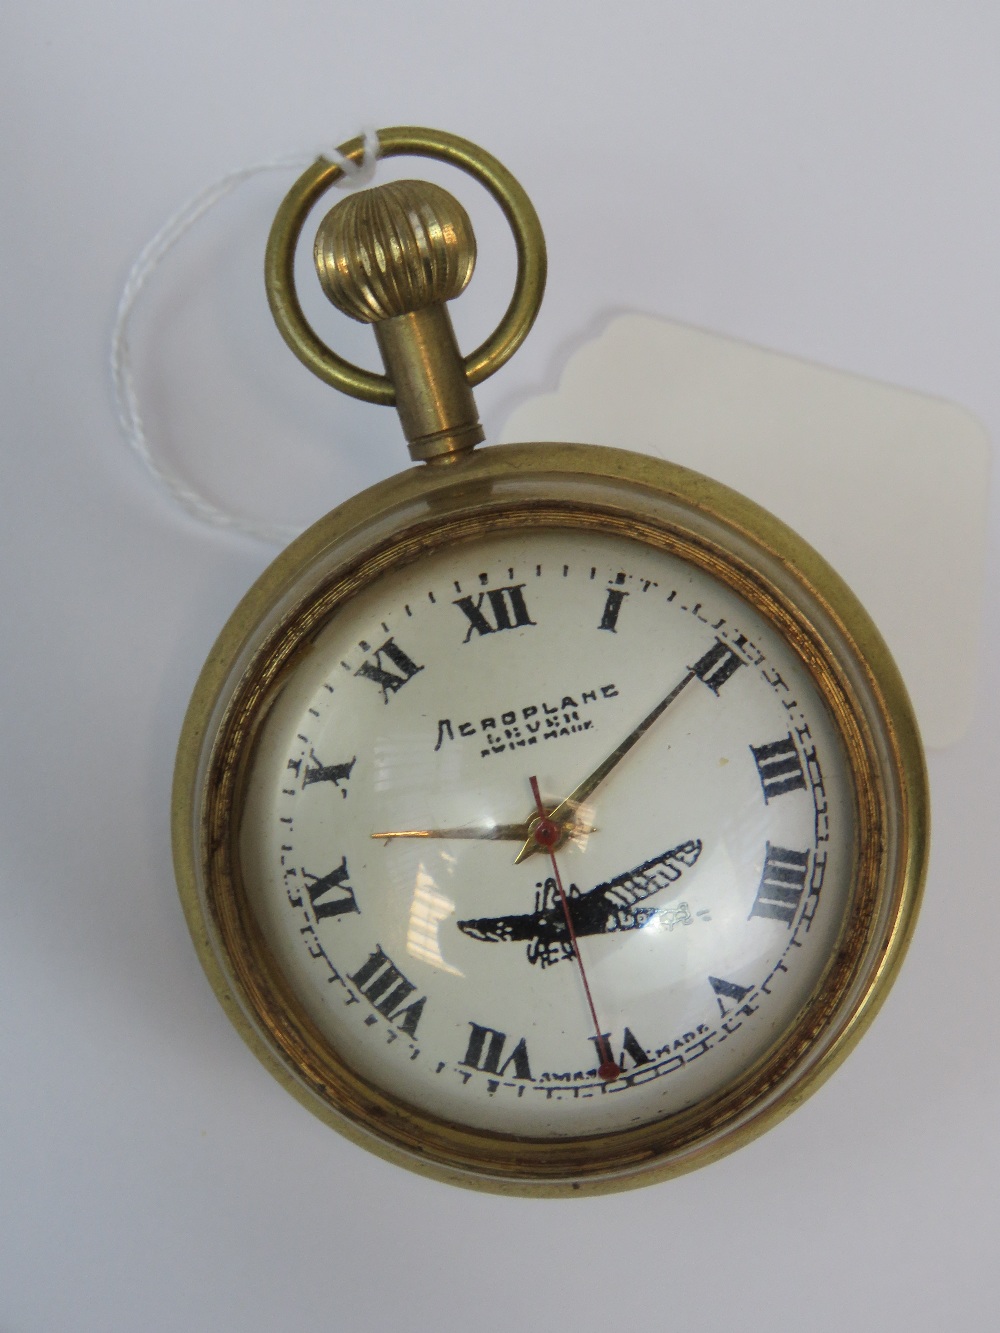 A brass cased 20th century spherical pocket watch marked 'Aeroplane Livre' to the face and